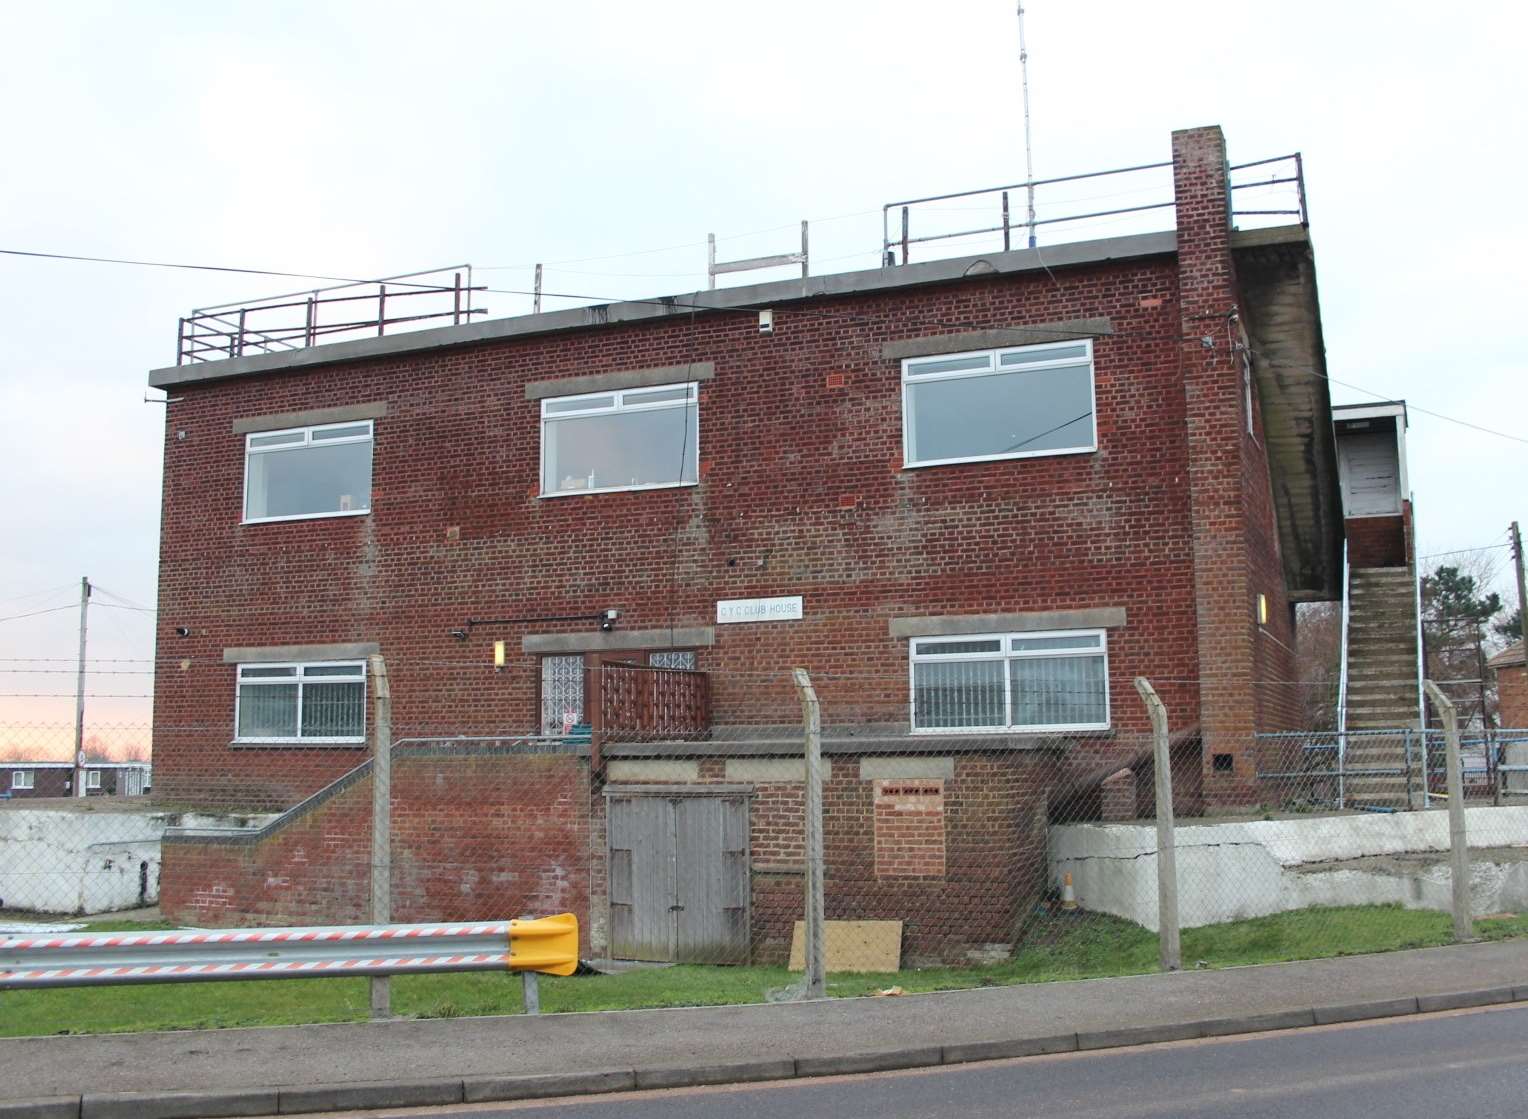 The former Sheppey Catamaran premises in Marine Parade, Sheerness, are being converted into a private members' club called Popeye's by Kings Arms landlord Ricky King.